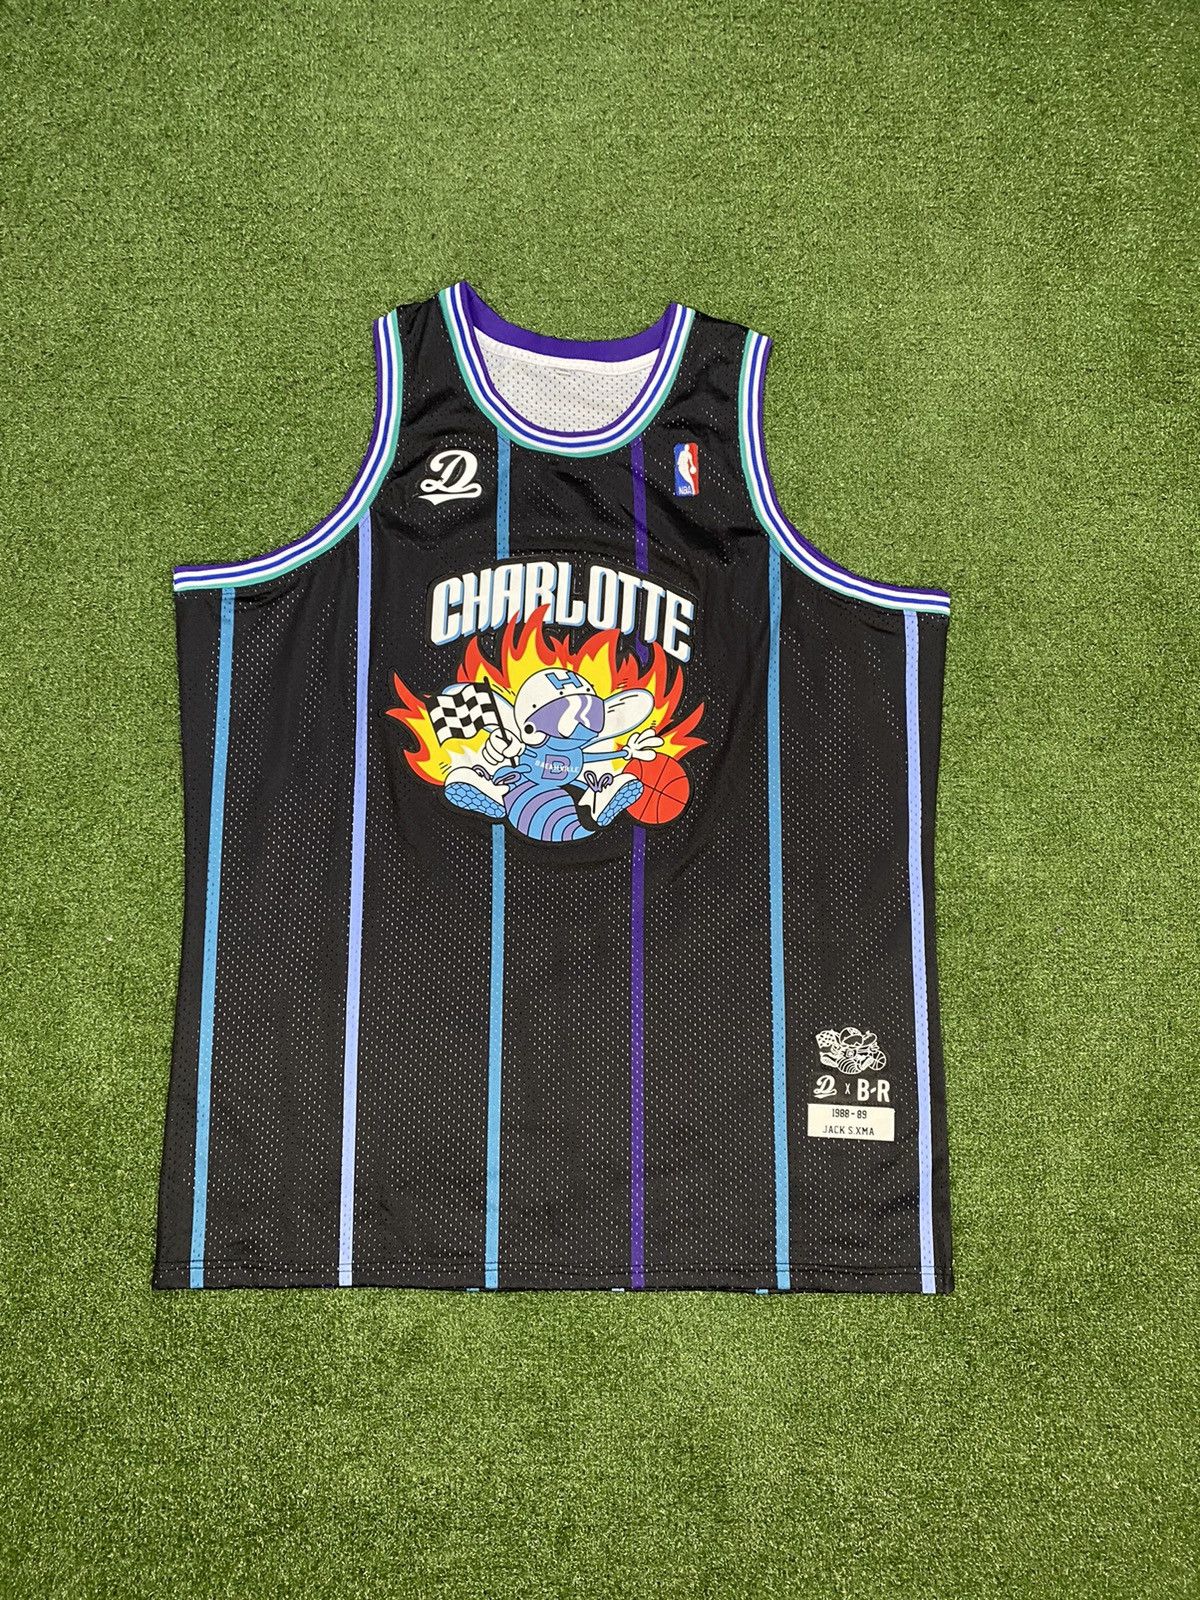 Charlotte Hornets/Dreamville #4 Jersey for Sale in Charlotte, NC